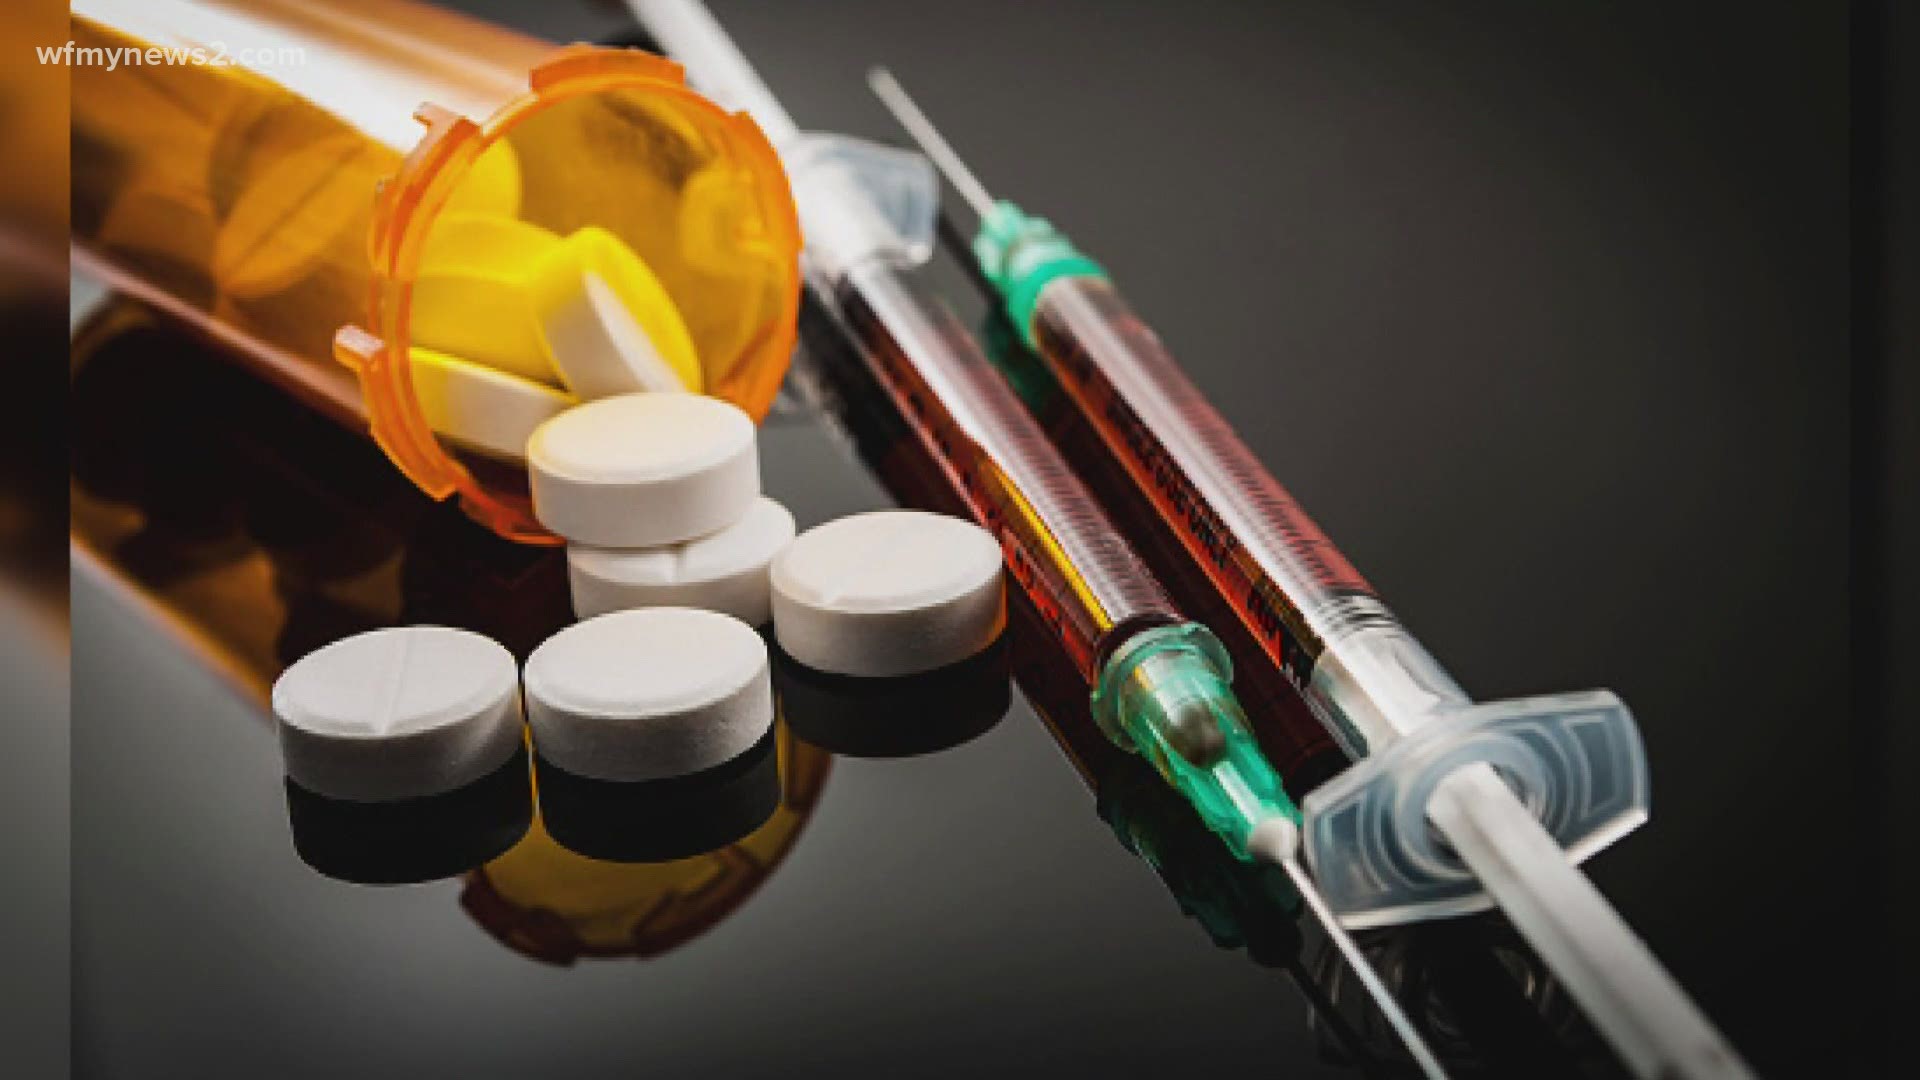 According to the CDC, we saw about 20,000 more overdose deaths in 2020 compared to just a year prior.